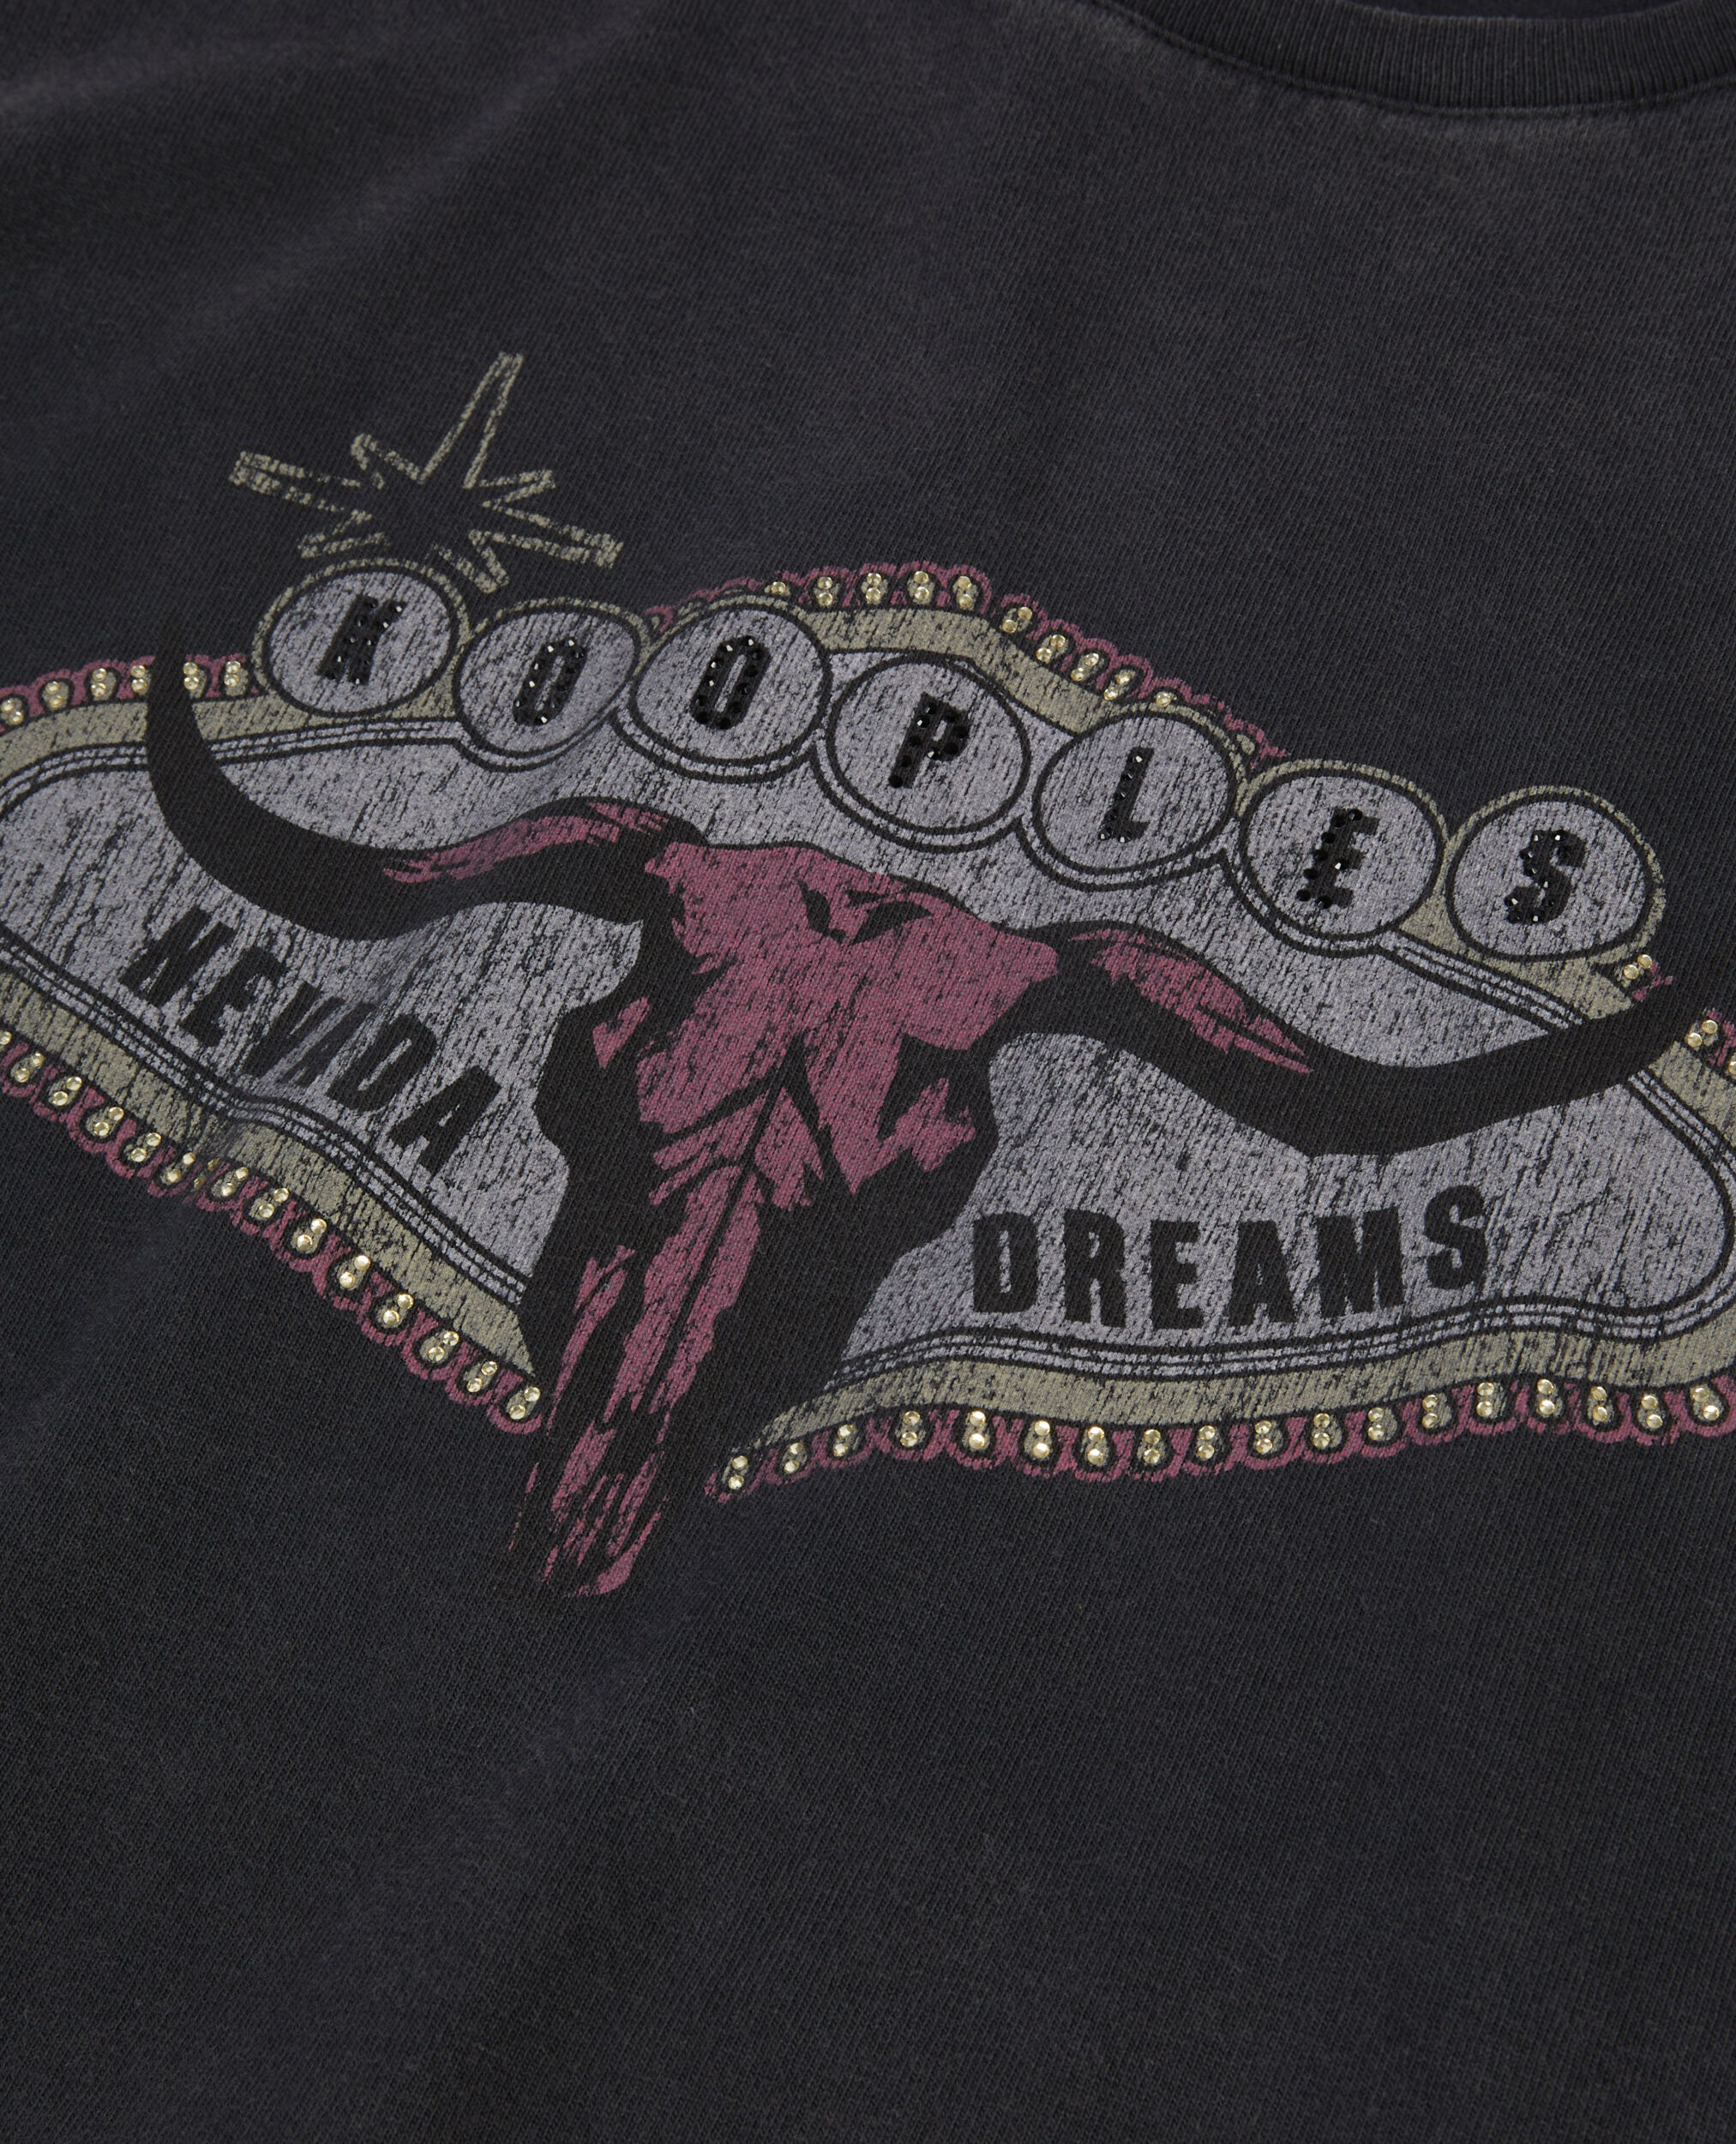 Black t-shirt with Nevada dreams serigraphy, BLACK WASHED, hi-res image number null